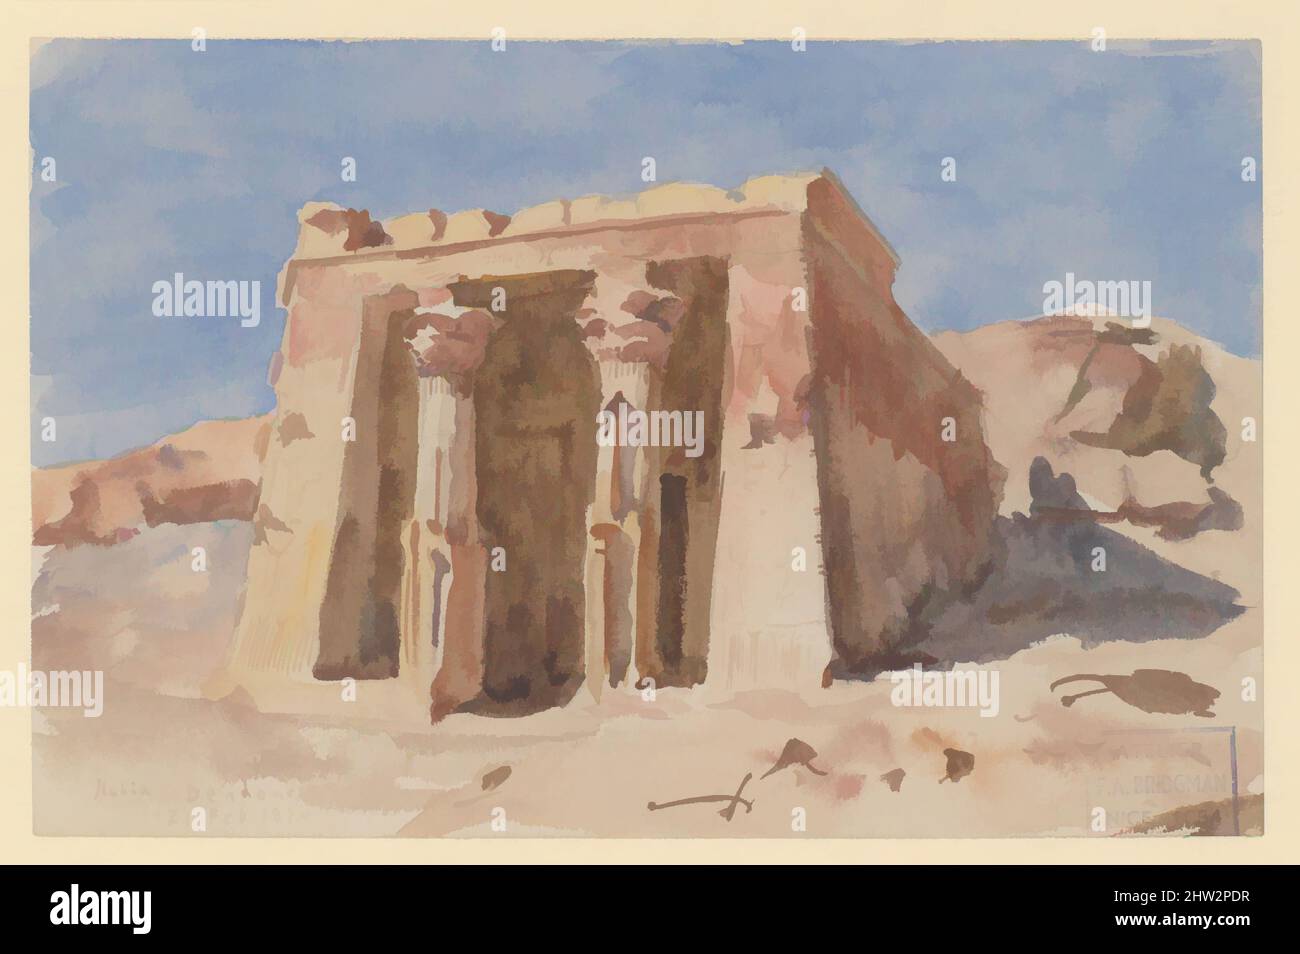 Art inspired by The Temple of Dendur, Watercolor and graphite on off-white wove paper, 4 7/8 x 7 9/16 in. (12.4 x 19.2 cm), Drawings, Frederick Arthur Bridgman (1847–1928, Classic works modernized by Artotop with a splash of modernity. Shapes, color and value, eye-catching visual impact on art. Emotions through freedom of artworks in a contemporary way. A timeless message pursuing a wildly creative new direction. Artists turning to the digital medium and creating the Artotop NFT Stock Photo